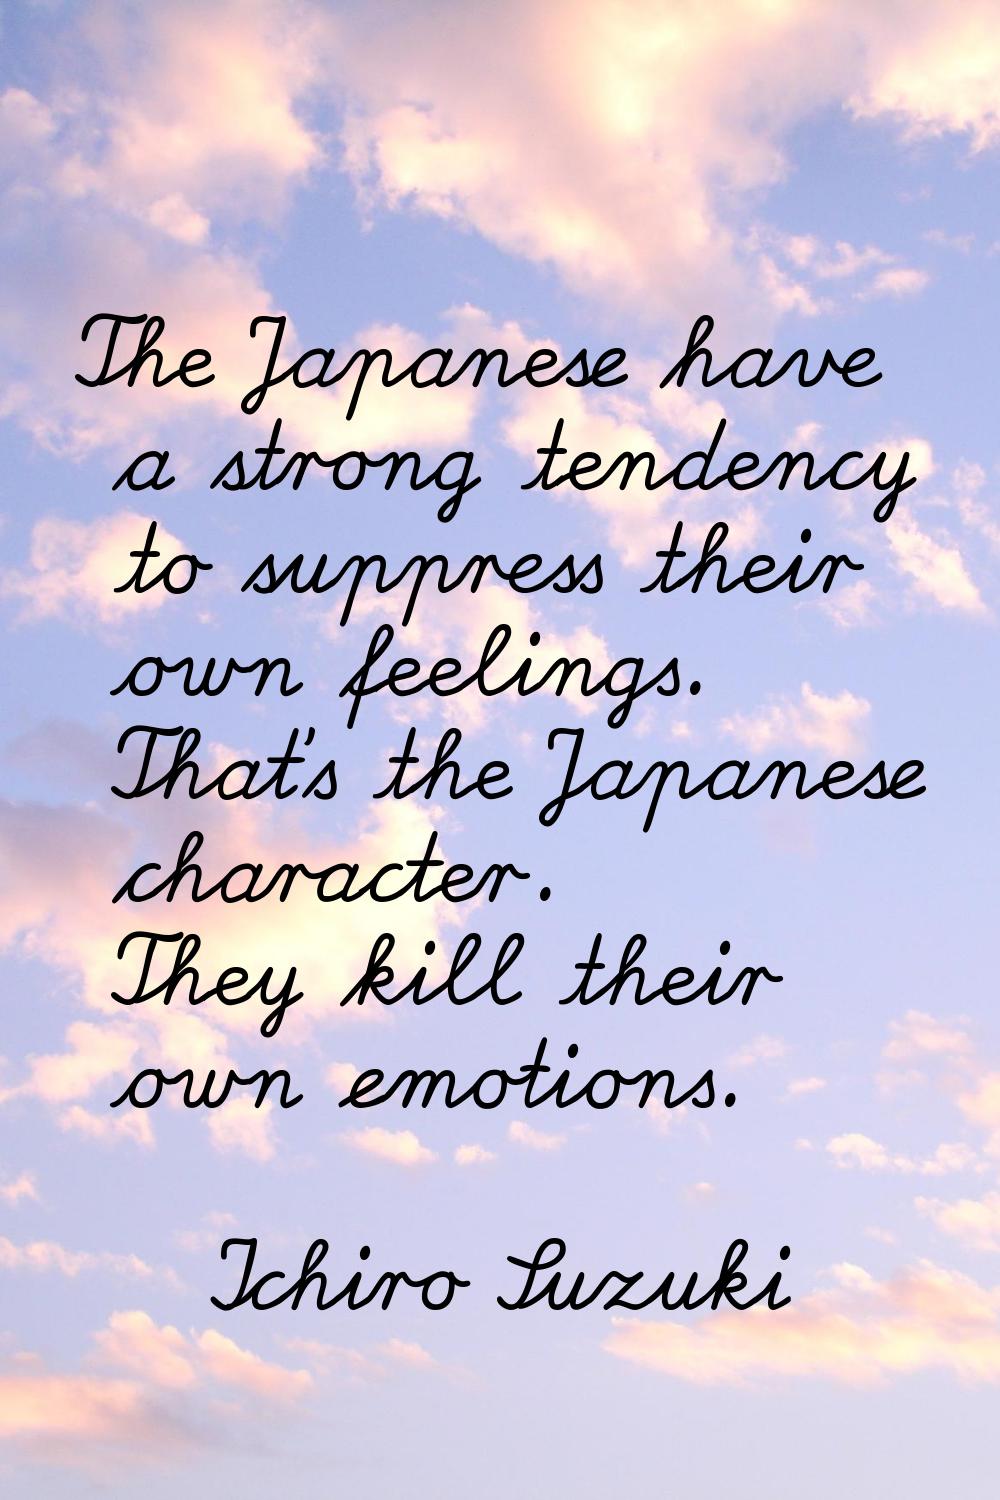 The Japanese have a strong tendency to suppress their own feelings. That's the Japanese character. 